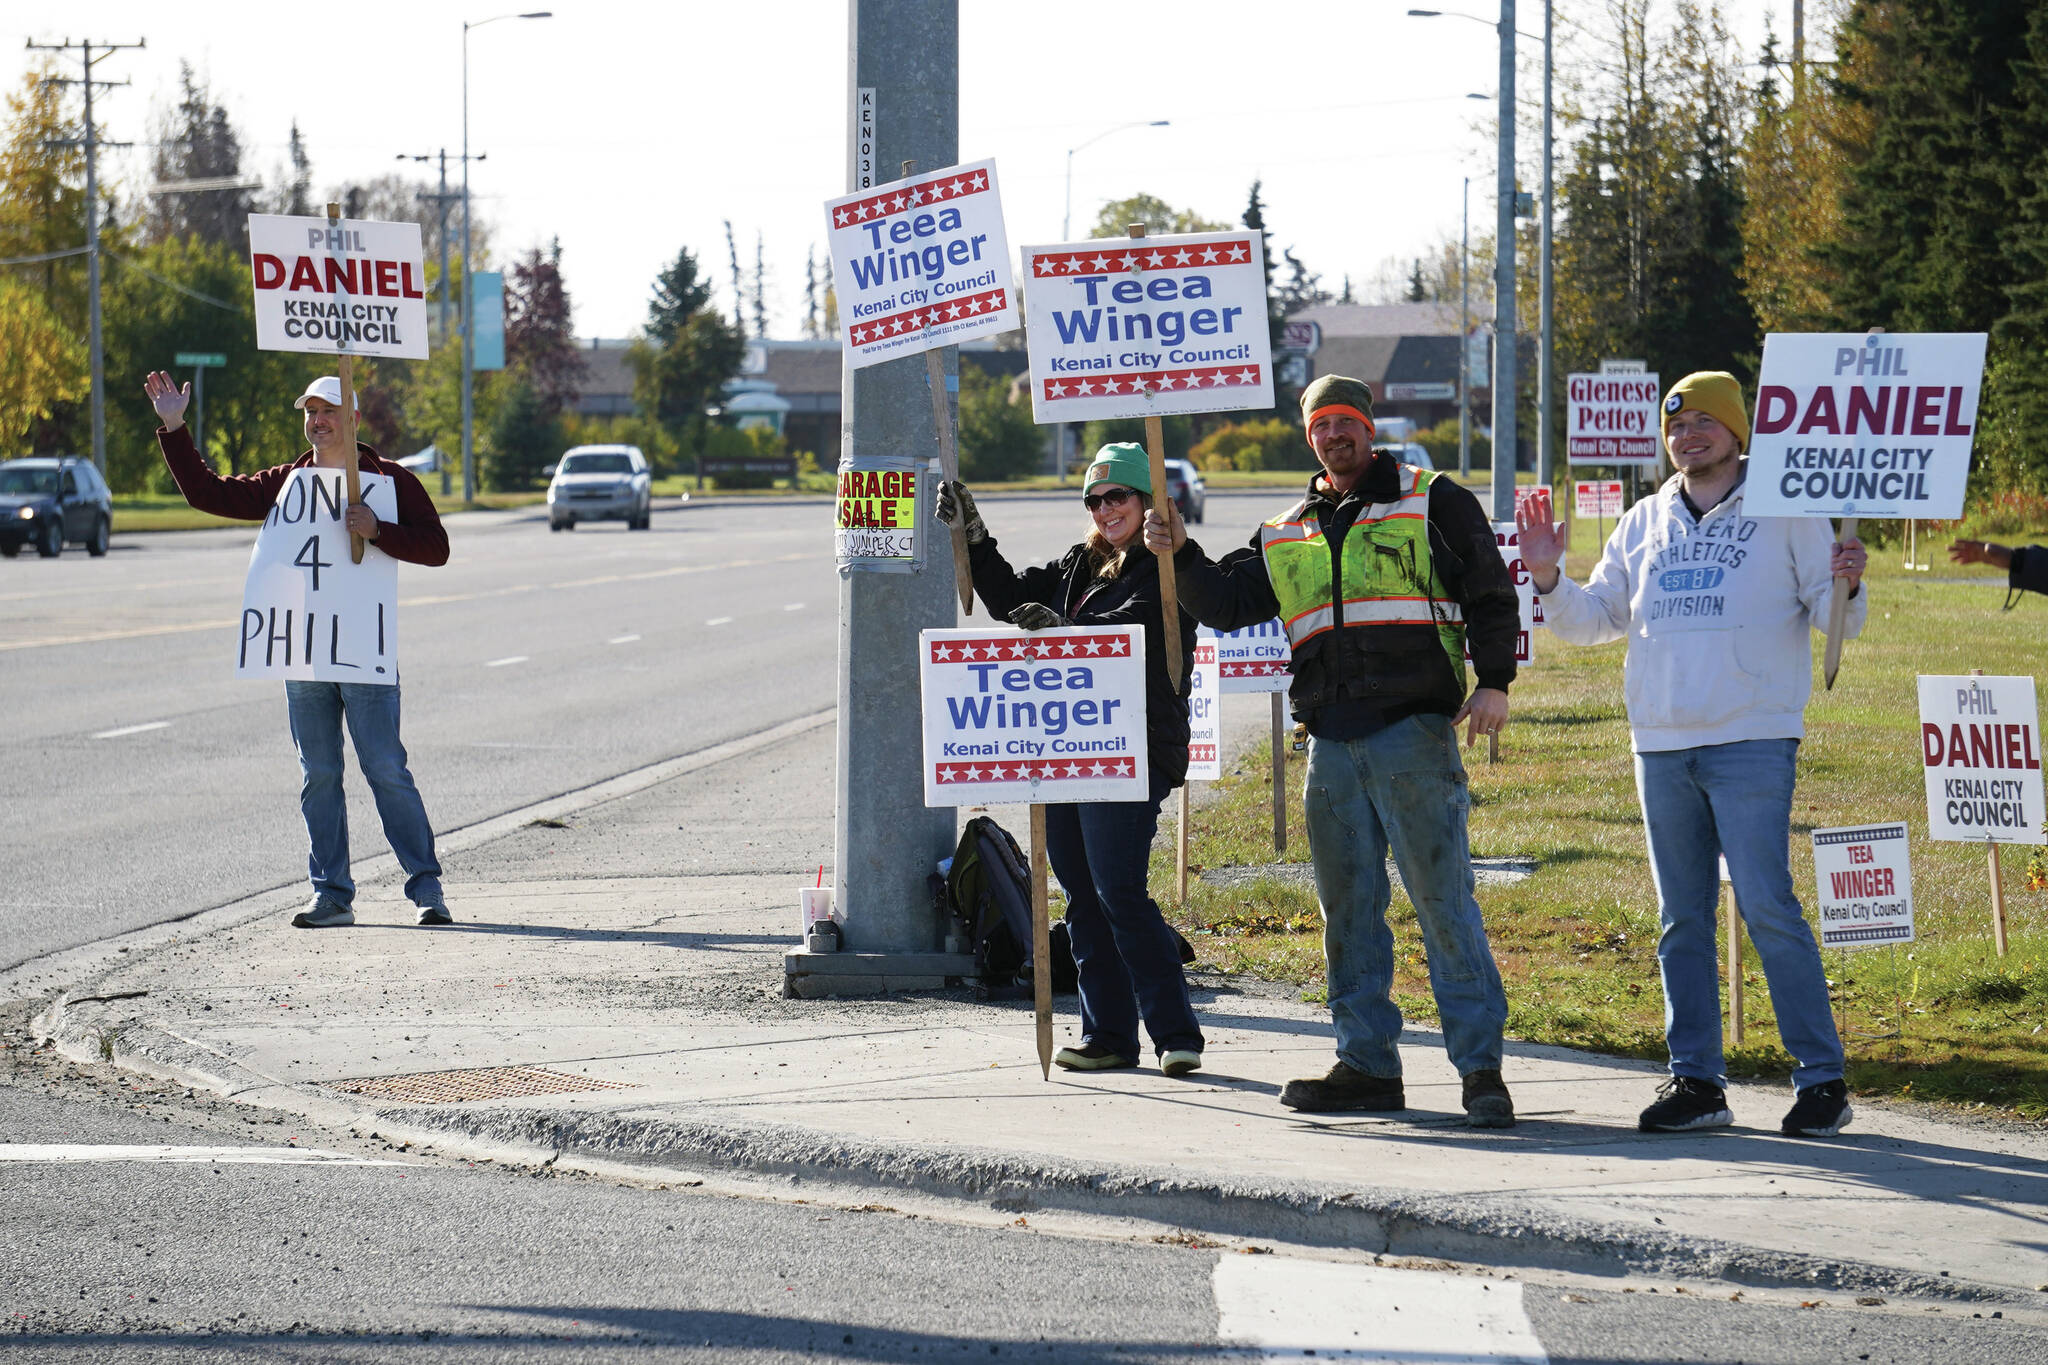 Phil Daniel, left, joins supporters of both himself and Teea Winger in waving signs on the corner of Bridge Access Road and the Kenai Spur Highway in Kenai, Alaska, for election day on Tuesday, Oct. 3, 2023. (Jake Dye/Peninsula Clarion)